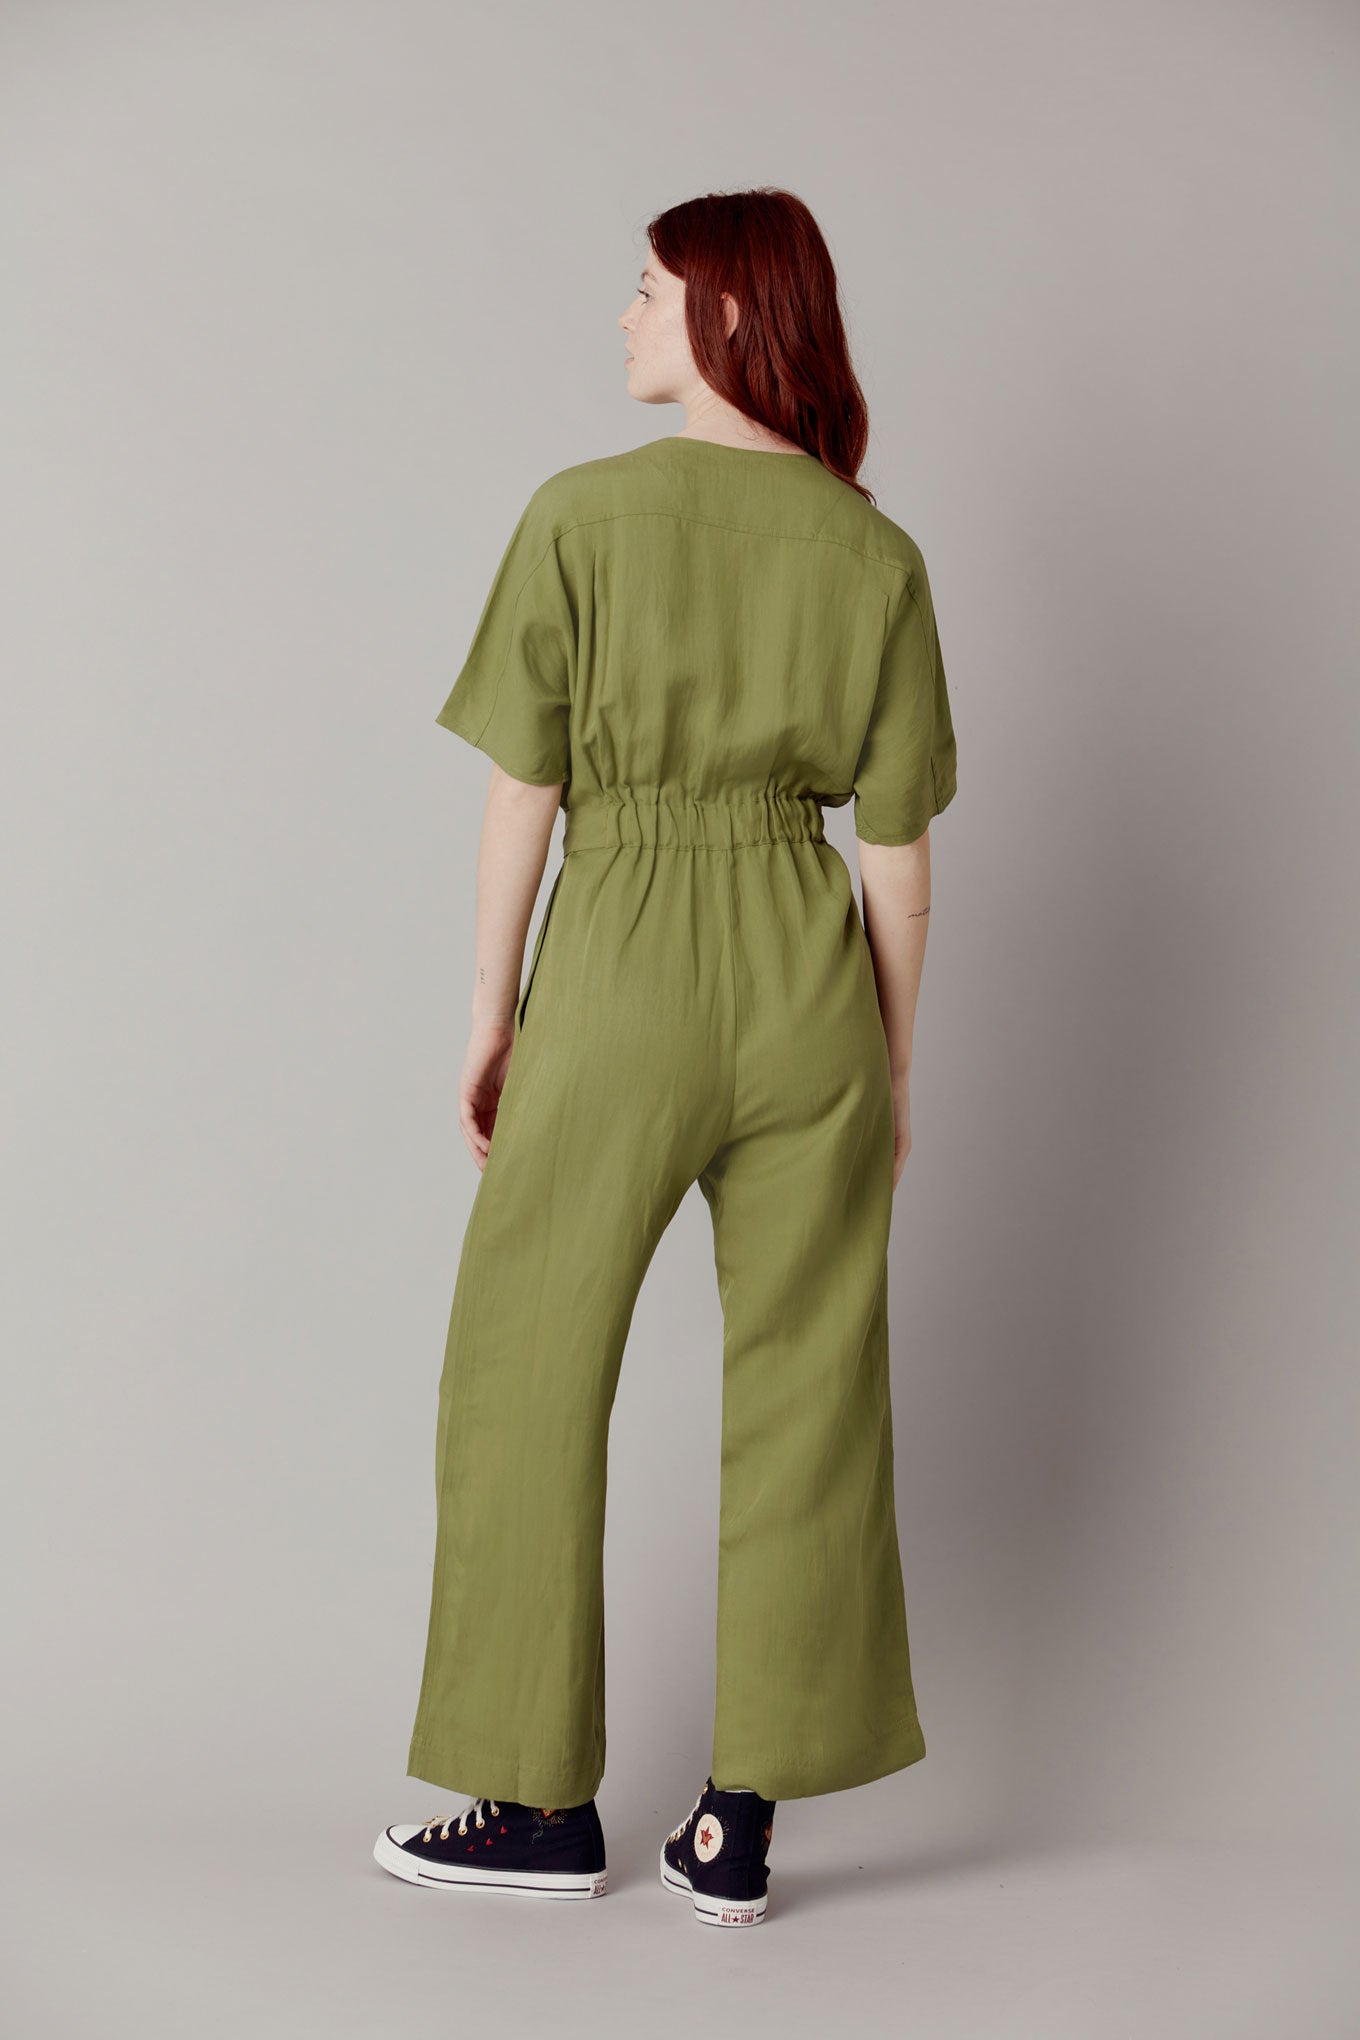 Green jumpsuit ASTIR made of tencel and linen from Komodo